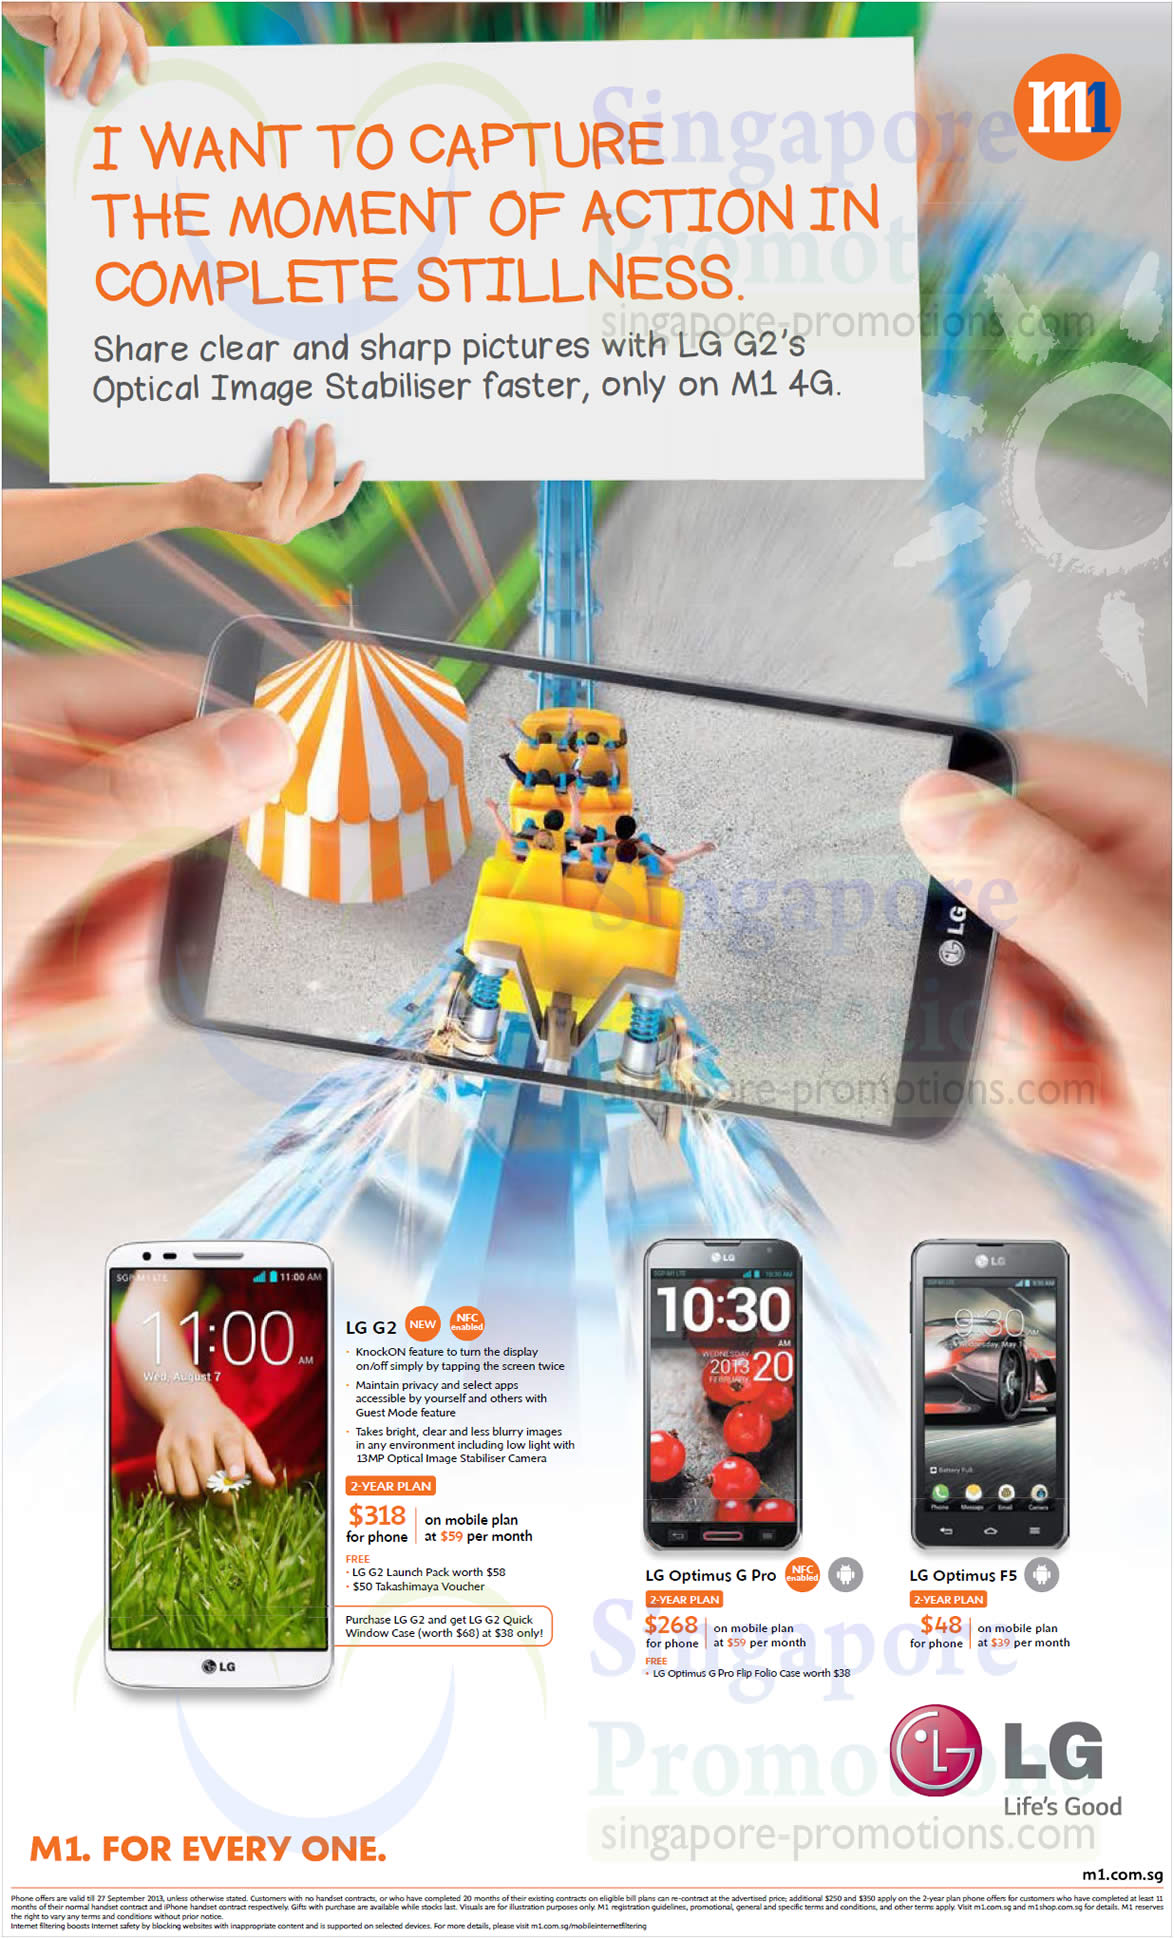 Featured image for M1 Smartphones, Tablets & Home/Mobile Broadband Offers 21 - 27 Sep 2013